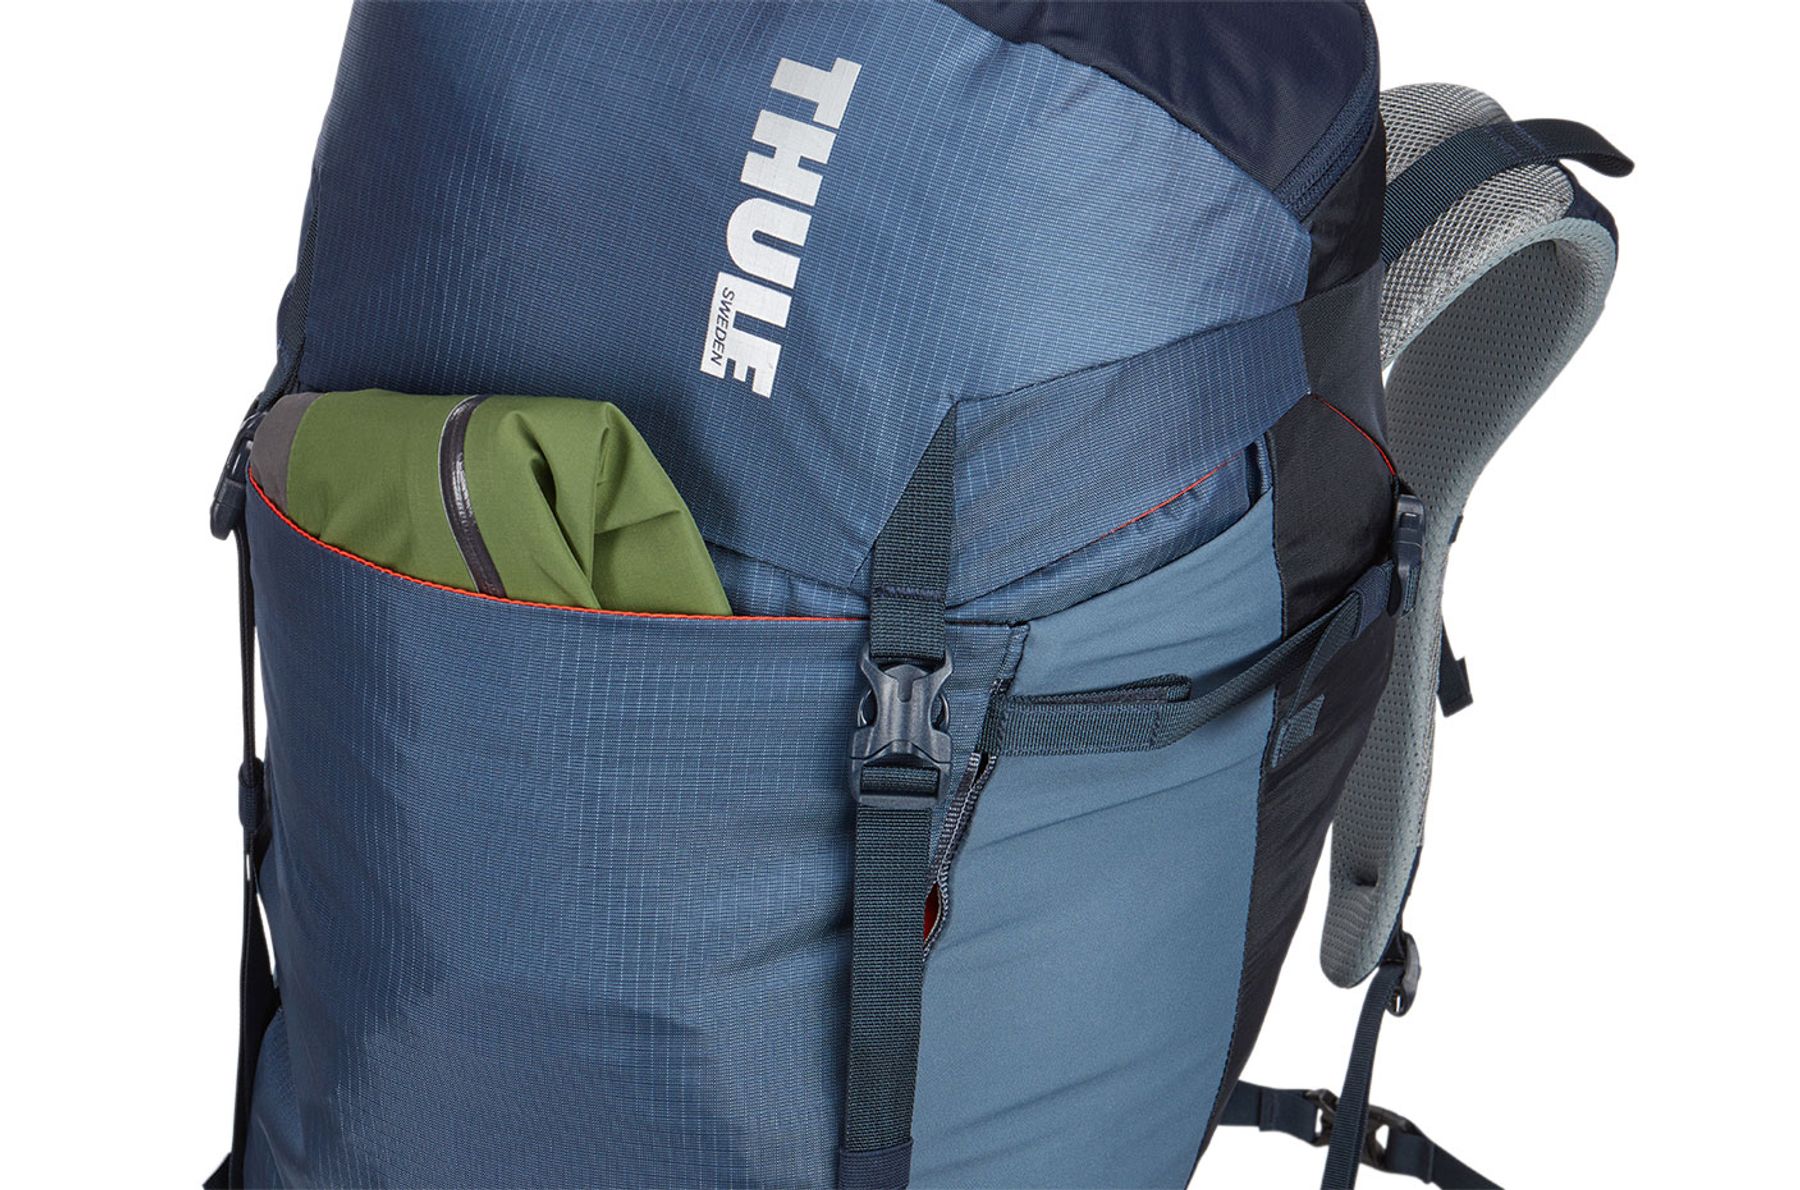 Hiking backpack-Thule Capstone 50L-Feature